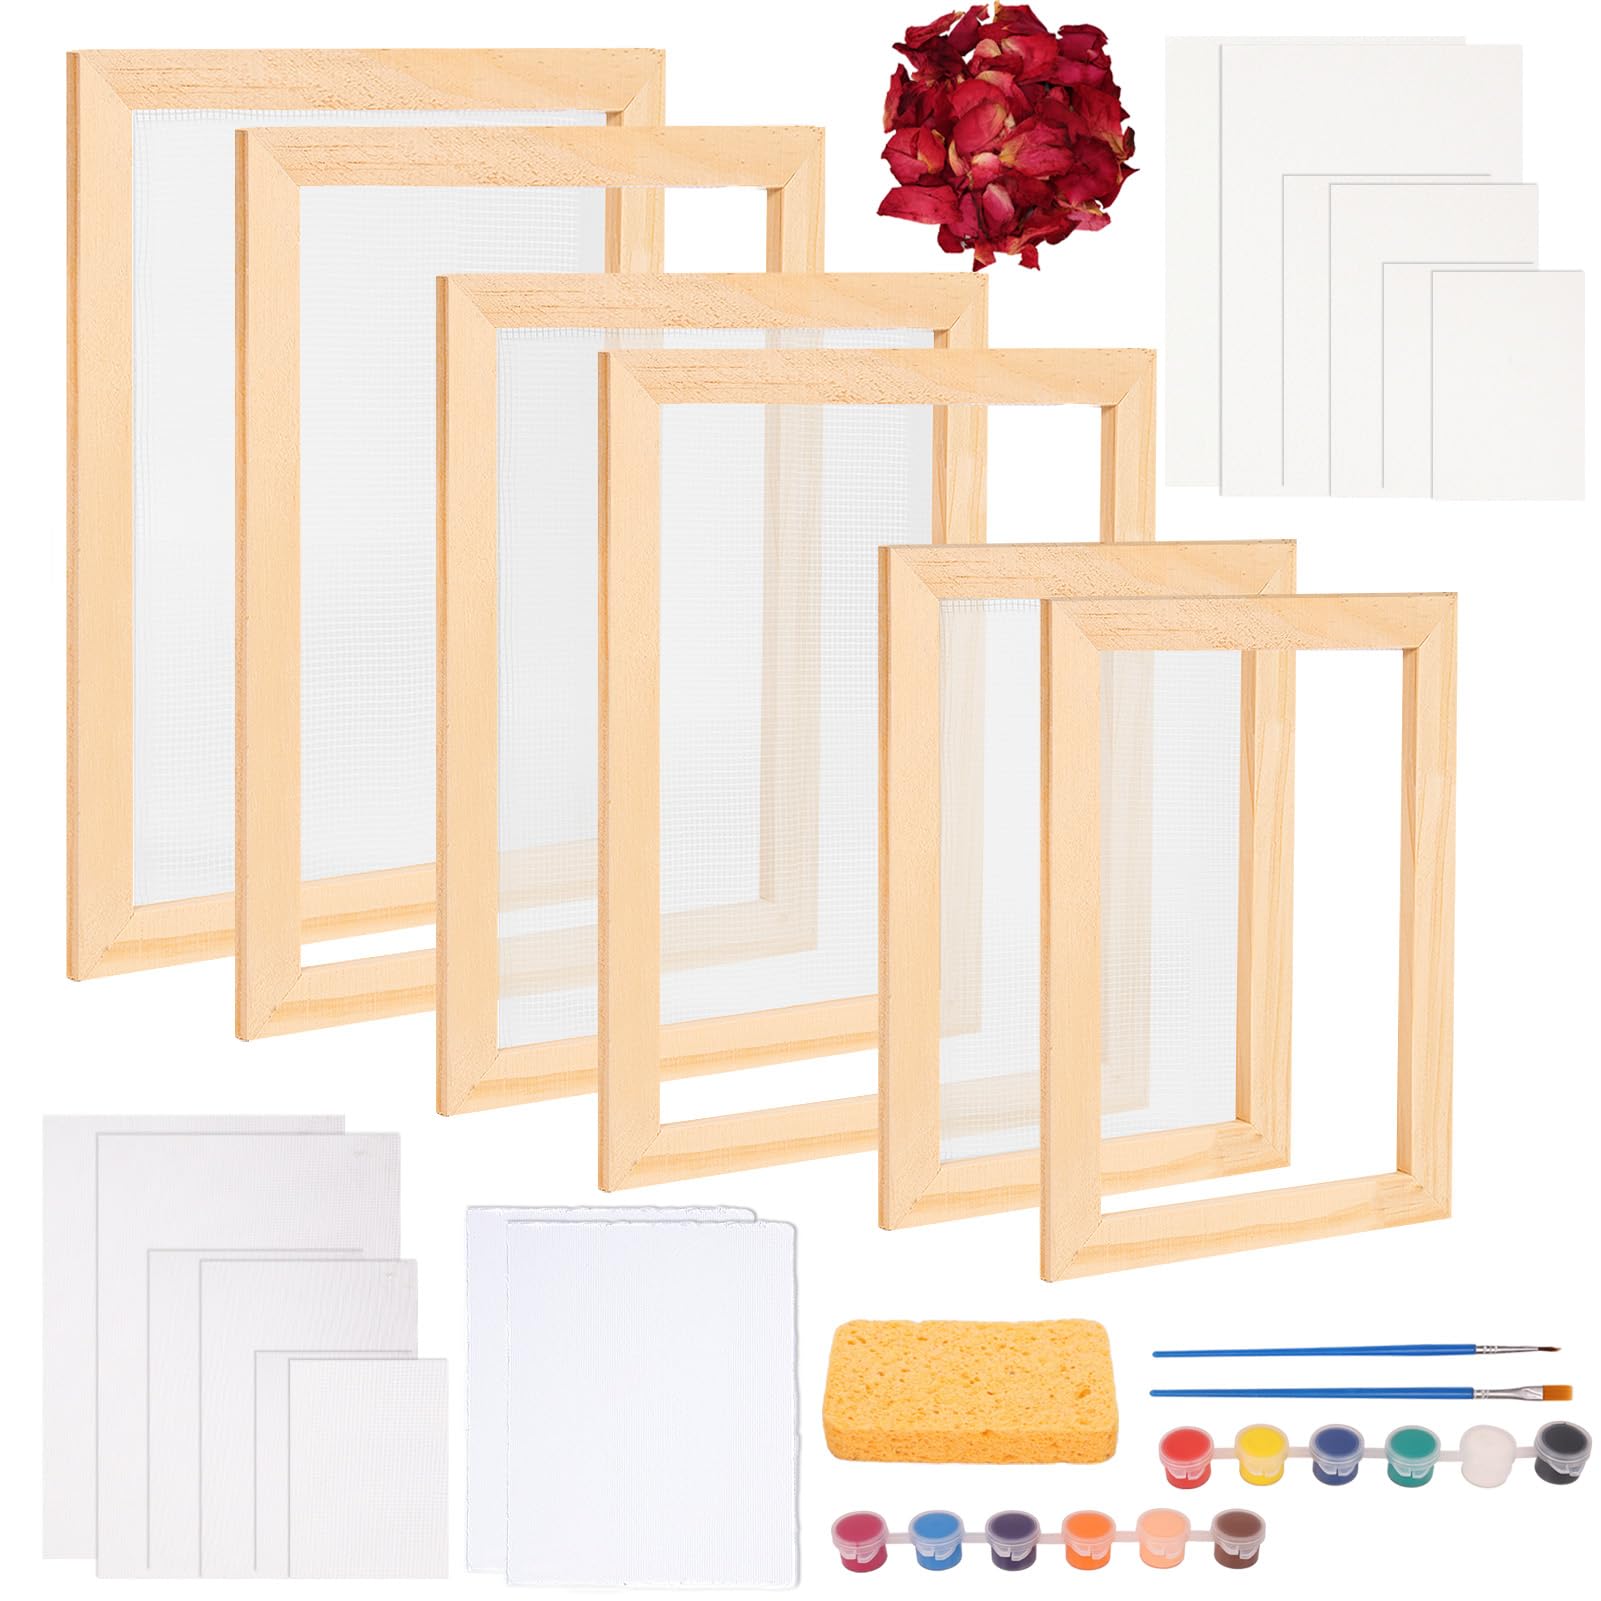 Caydo 18 Pieces Paper Making Kit Includes A5, A6 Size Wooden Mold and  Deckle, Absorbent Paper, Pulp, Sponge, Paints, Confetti and Instructions  for DIY